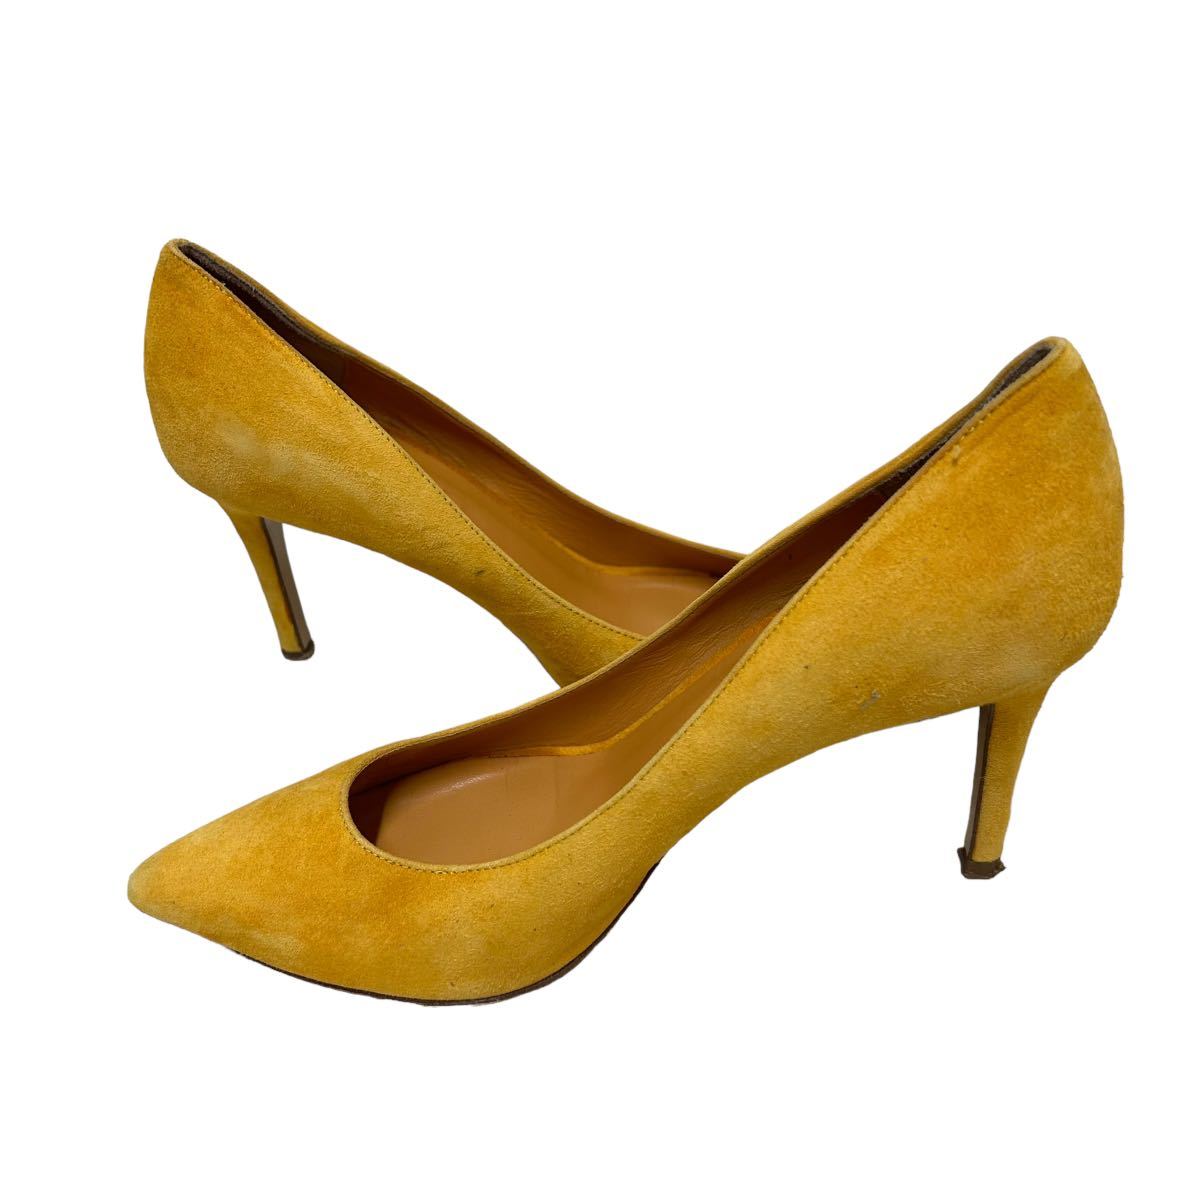 AM729 Italy made FABIO RUSCONI fabio rusko-ni lady's pumps 36 approximately 23cm yellow group suede pin heel sack attaching 